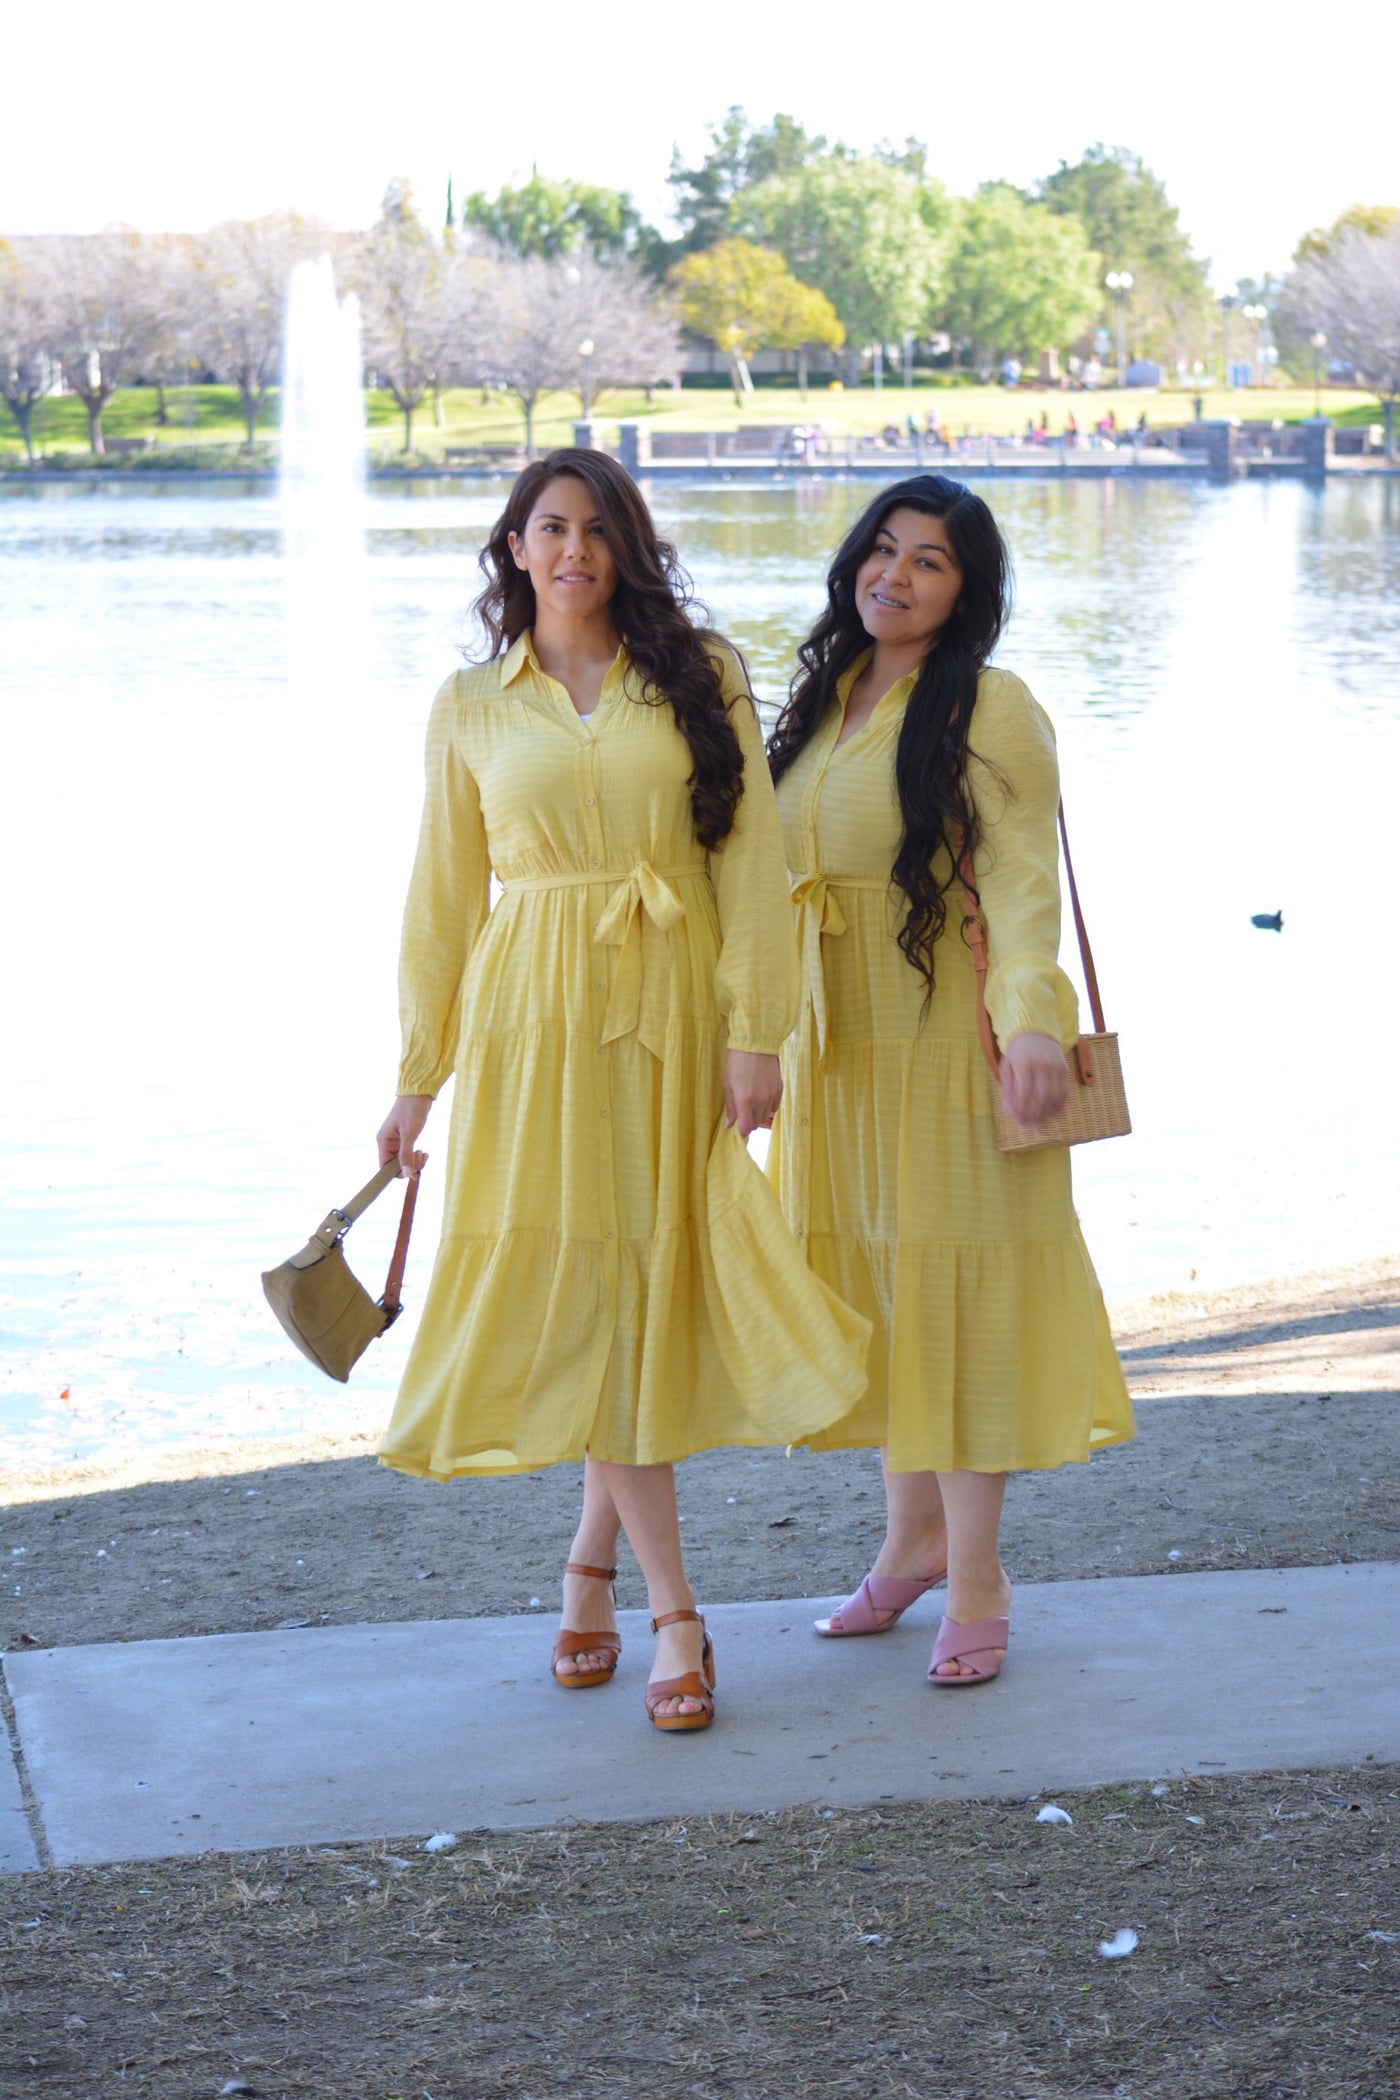 Constance Yellow Tiered Dress